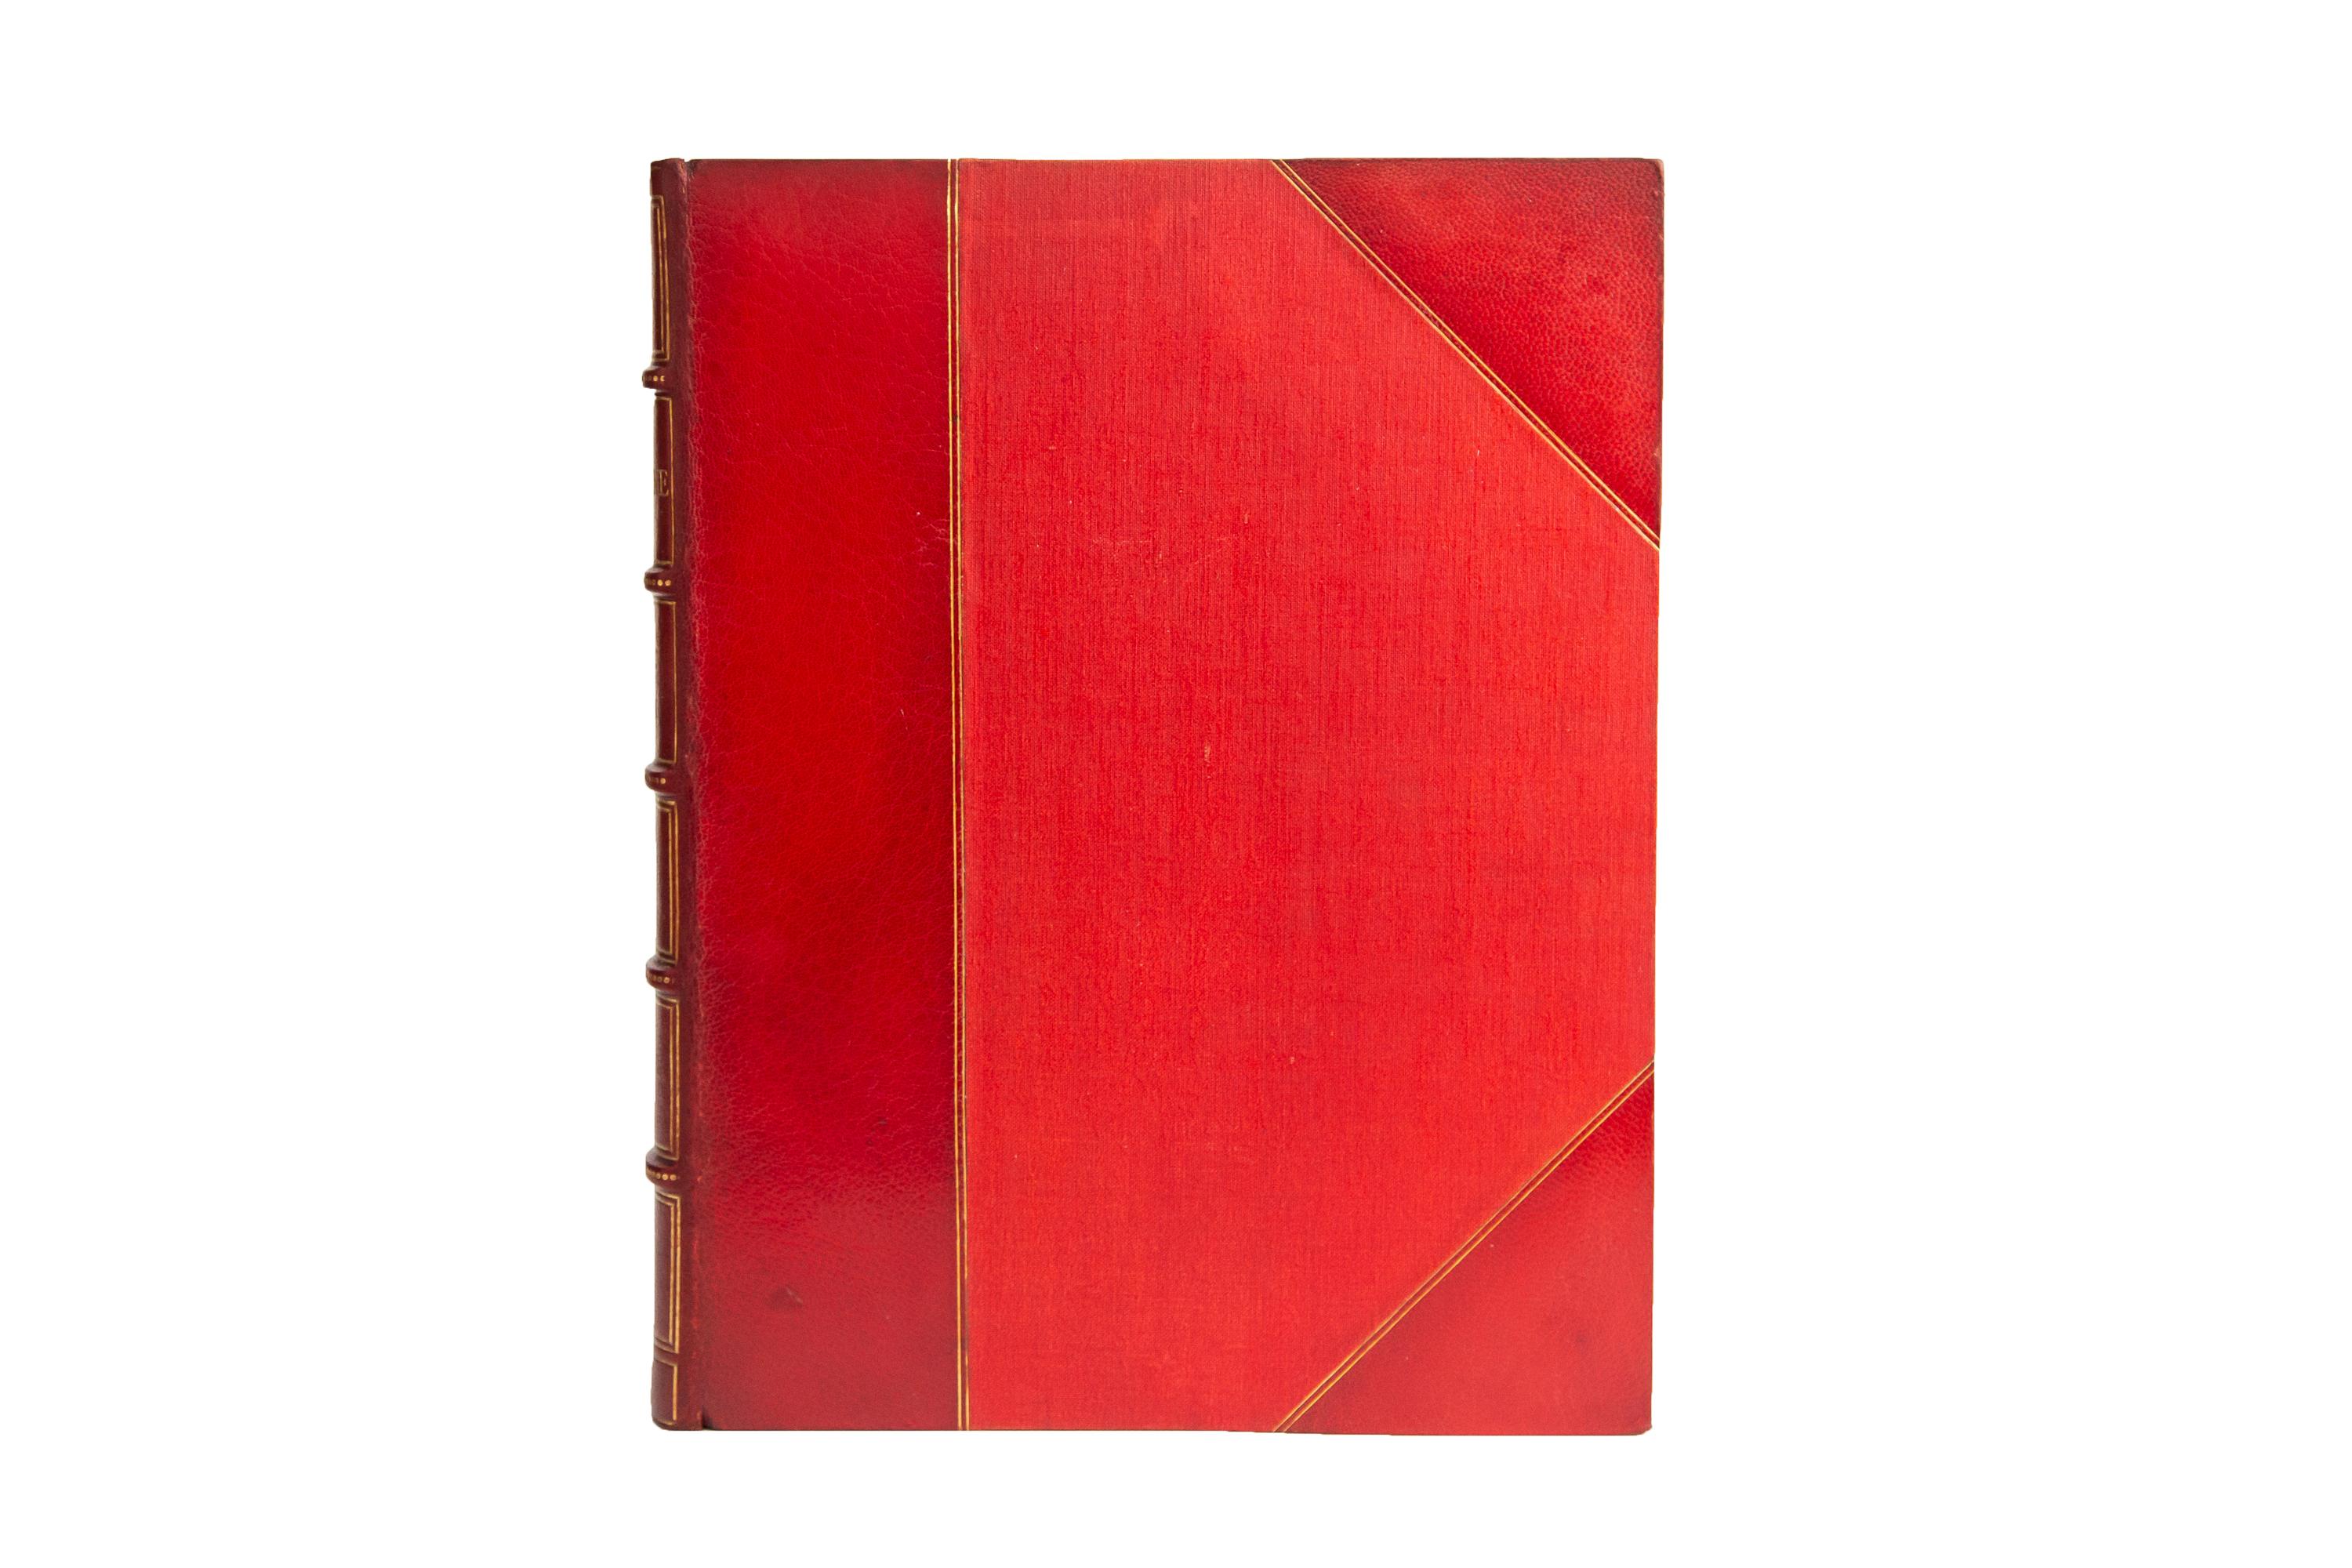 1 Volume. Frédéric Masson, Josephine: Empress & Queen. Bound by Riviere & Son in 3/4 red morocco and linen boards, bordered in gilt tooling. Raised bands, dotted in gilt tooling with panels displaying borders, bird imagery, and label lettering, all